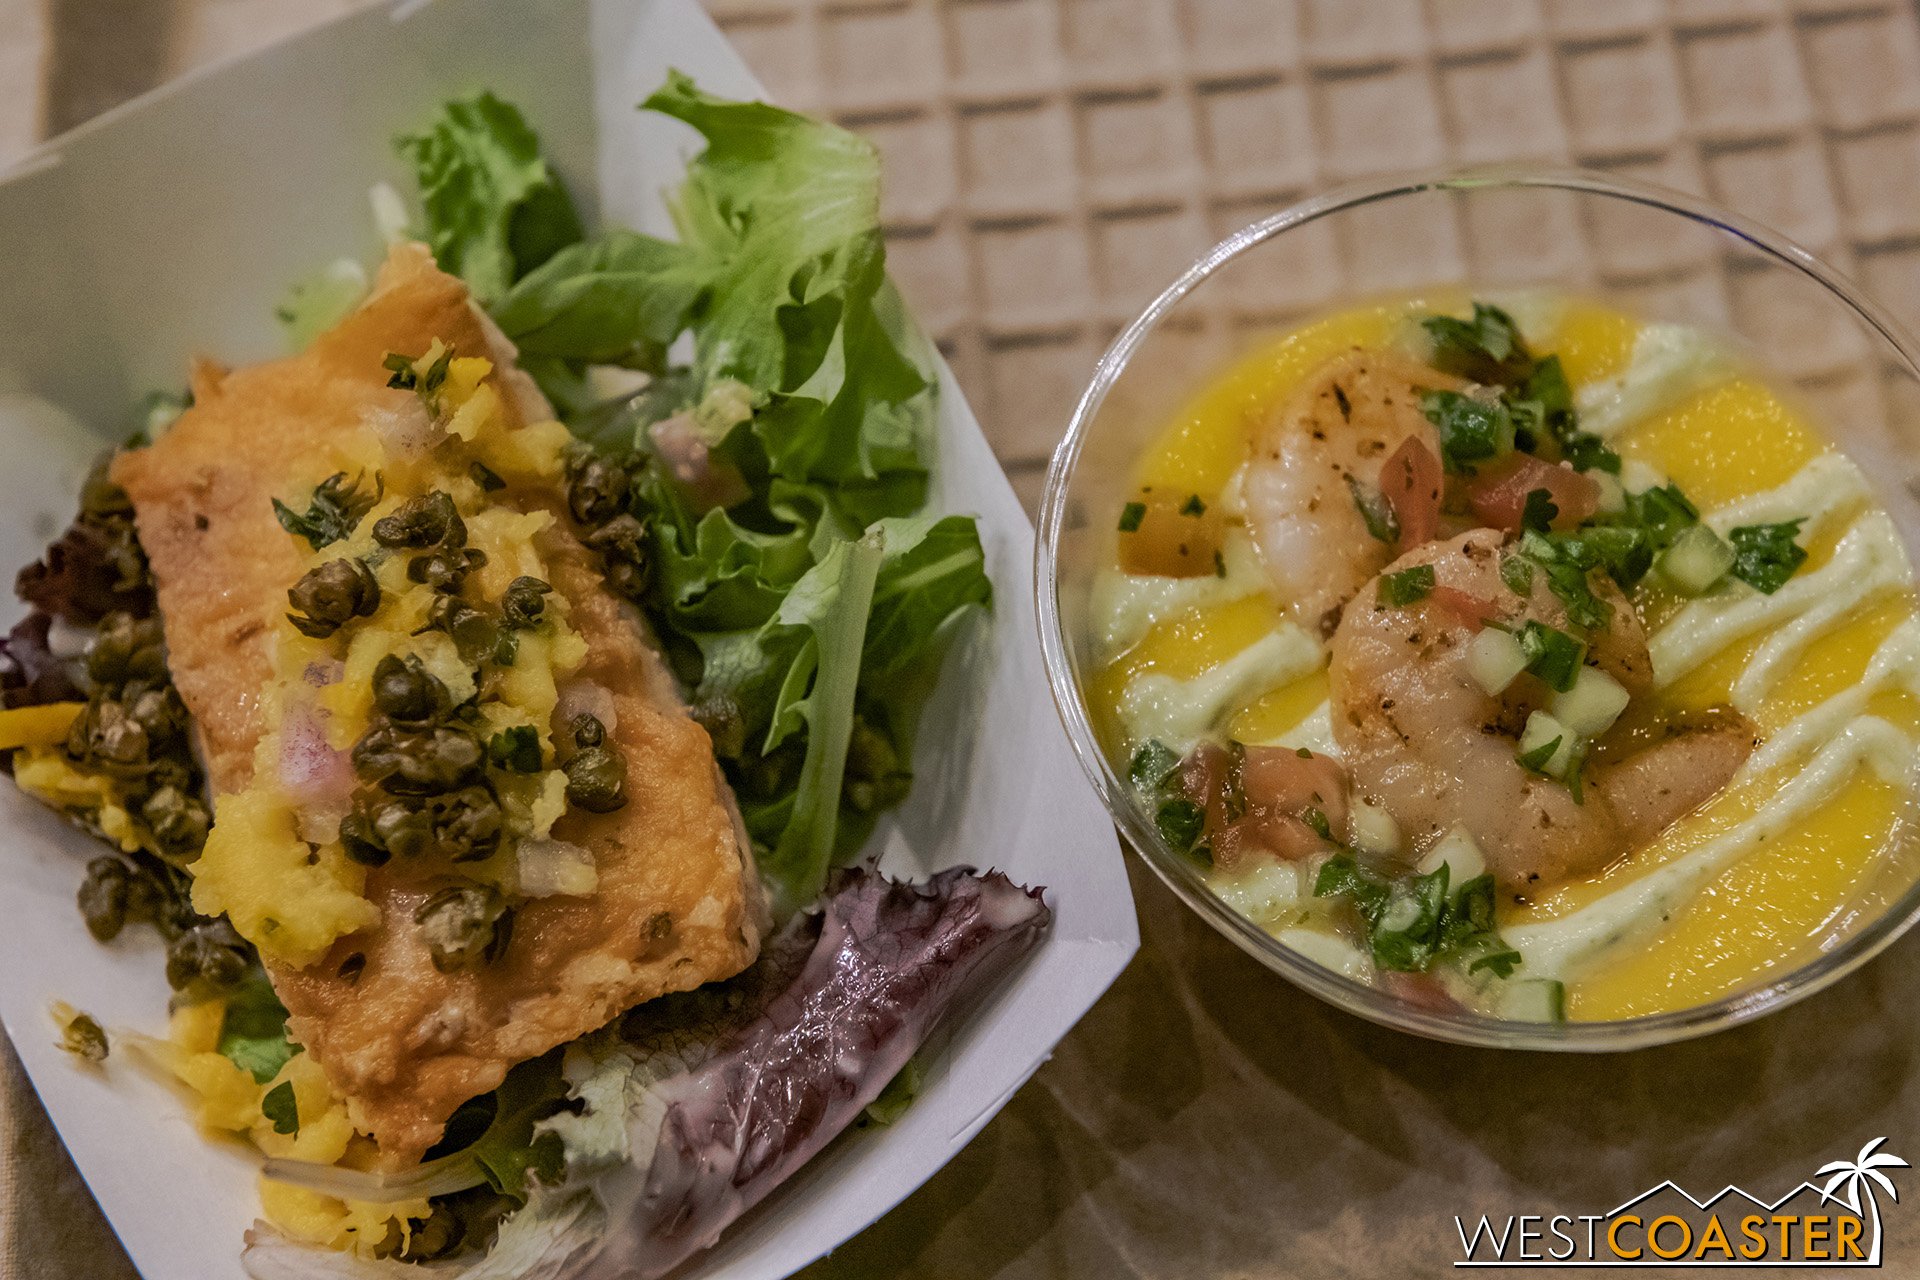  Golden Dreams: (left) Honey-Orange-glazed Salmon Salad with citrus vinaigrette  (right) Mango-Carrot Gazpacho with grilled shrimp and jalapeño crema  The Verlasse salmon that Disney has offered in past food festivals has typically been tender and fl